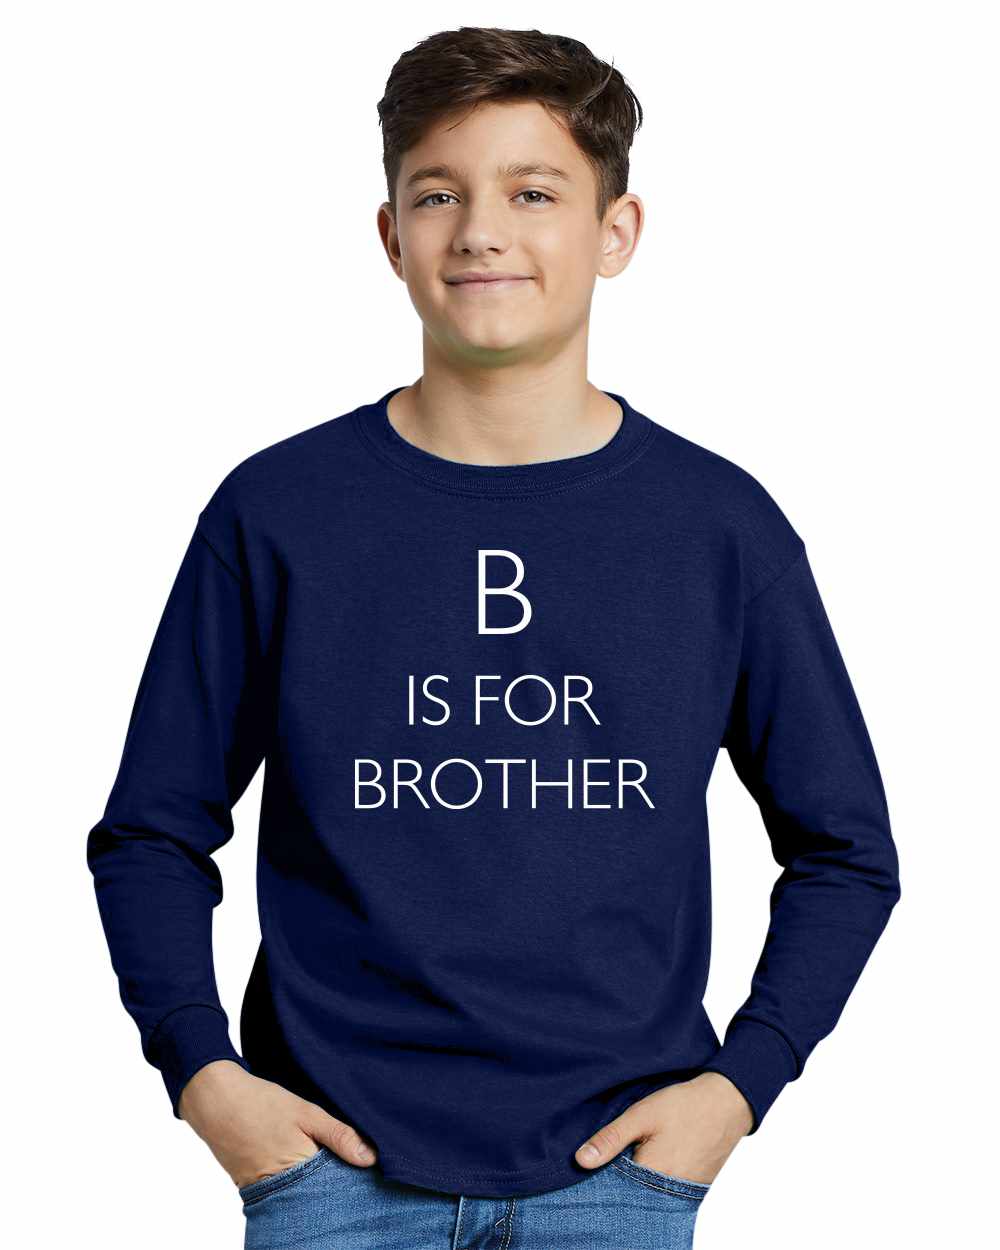 B is for Brother on Youth Long Sleeve Shirt (#1009-203)